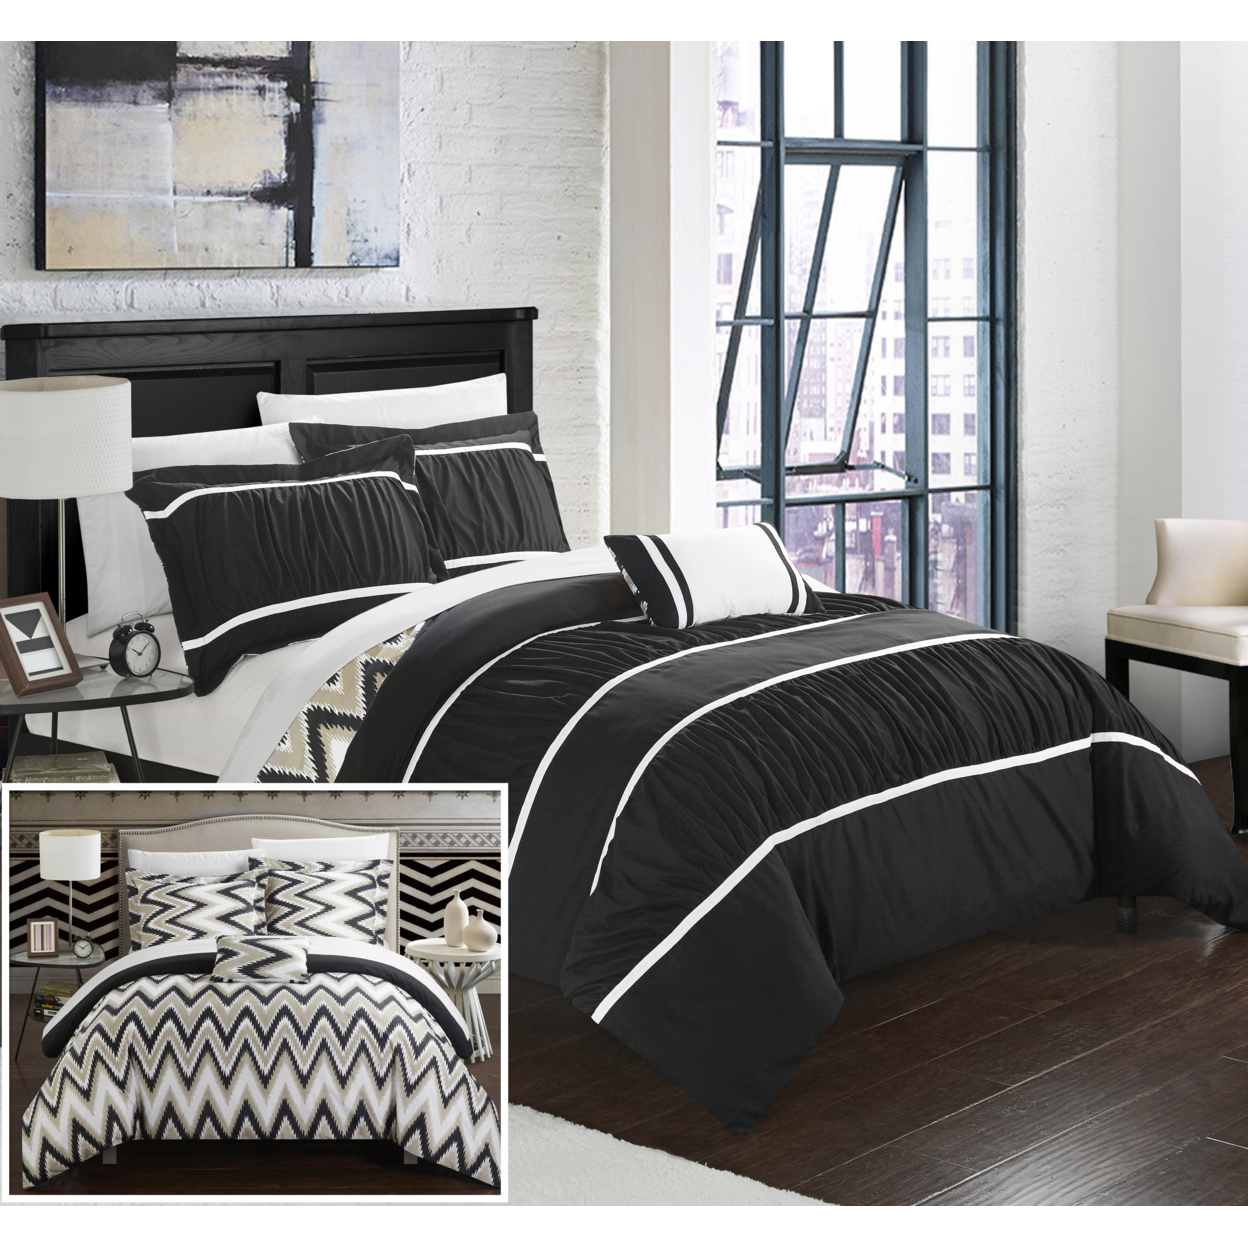 4 Or 3 Piece Lucia Pleated & Ruffled With Chevron REVERSIBLE Backing Comforter Set - Black, King